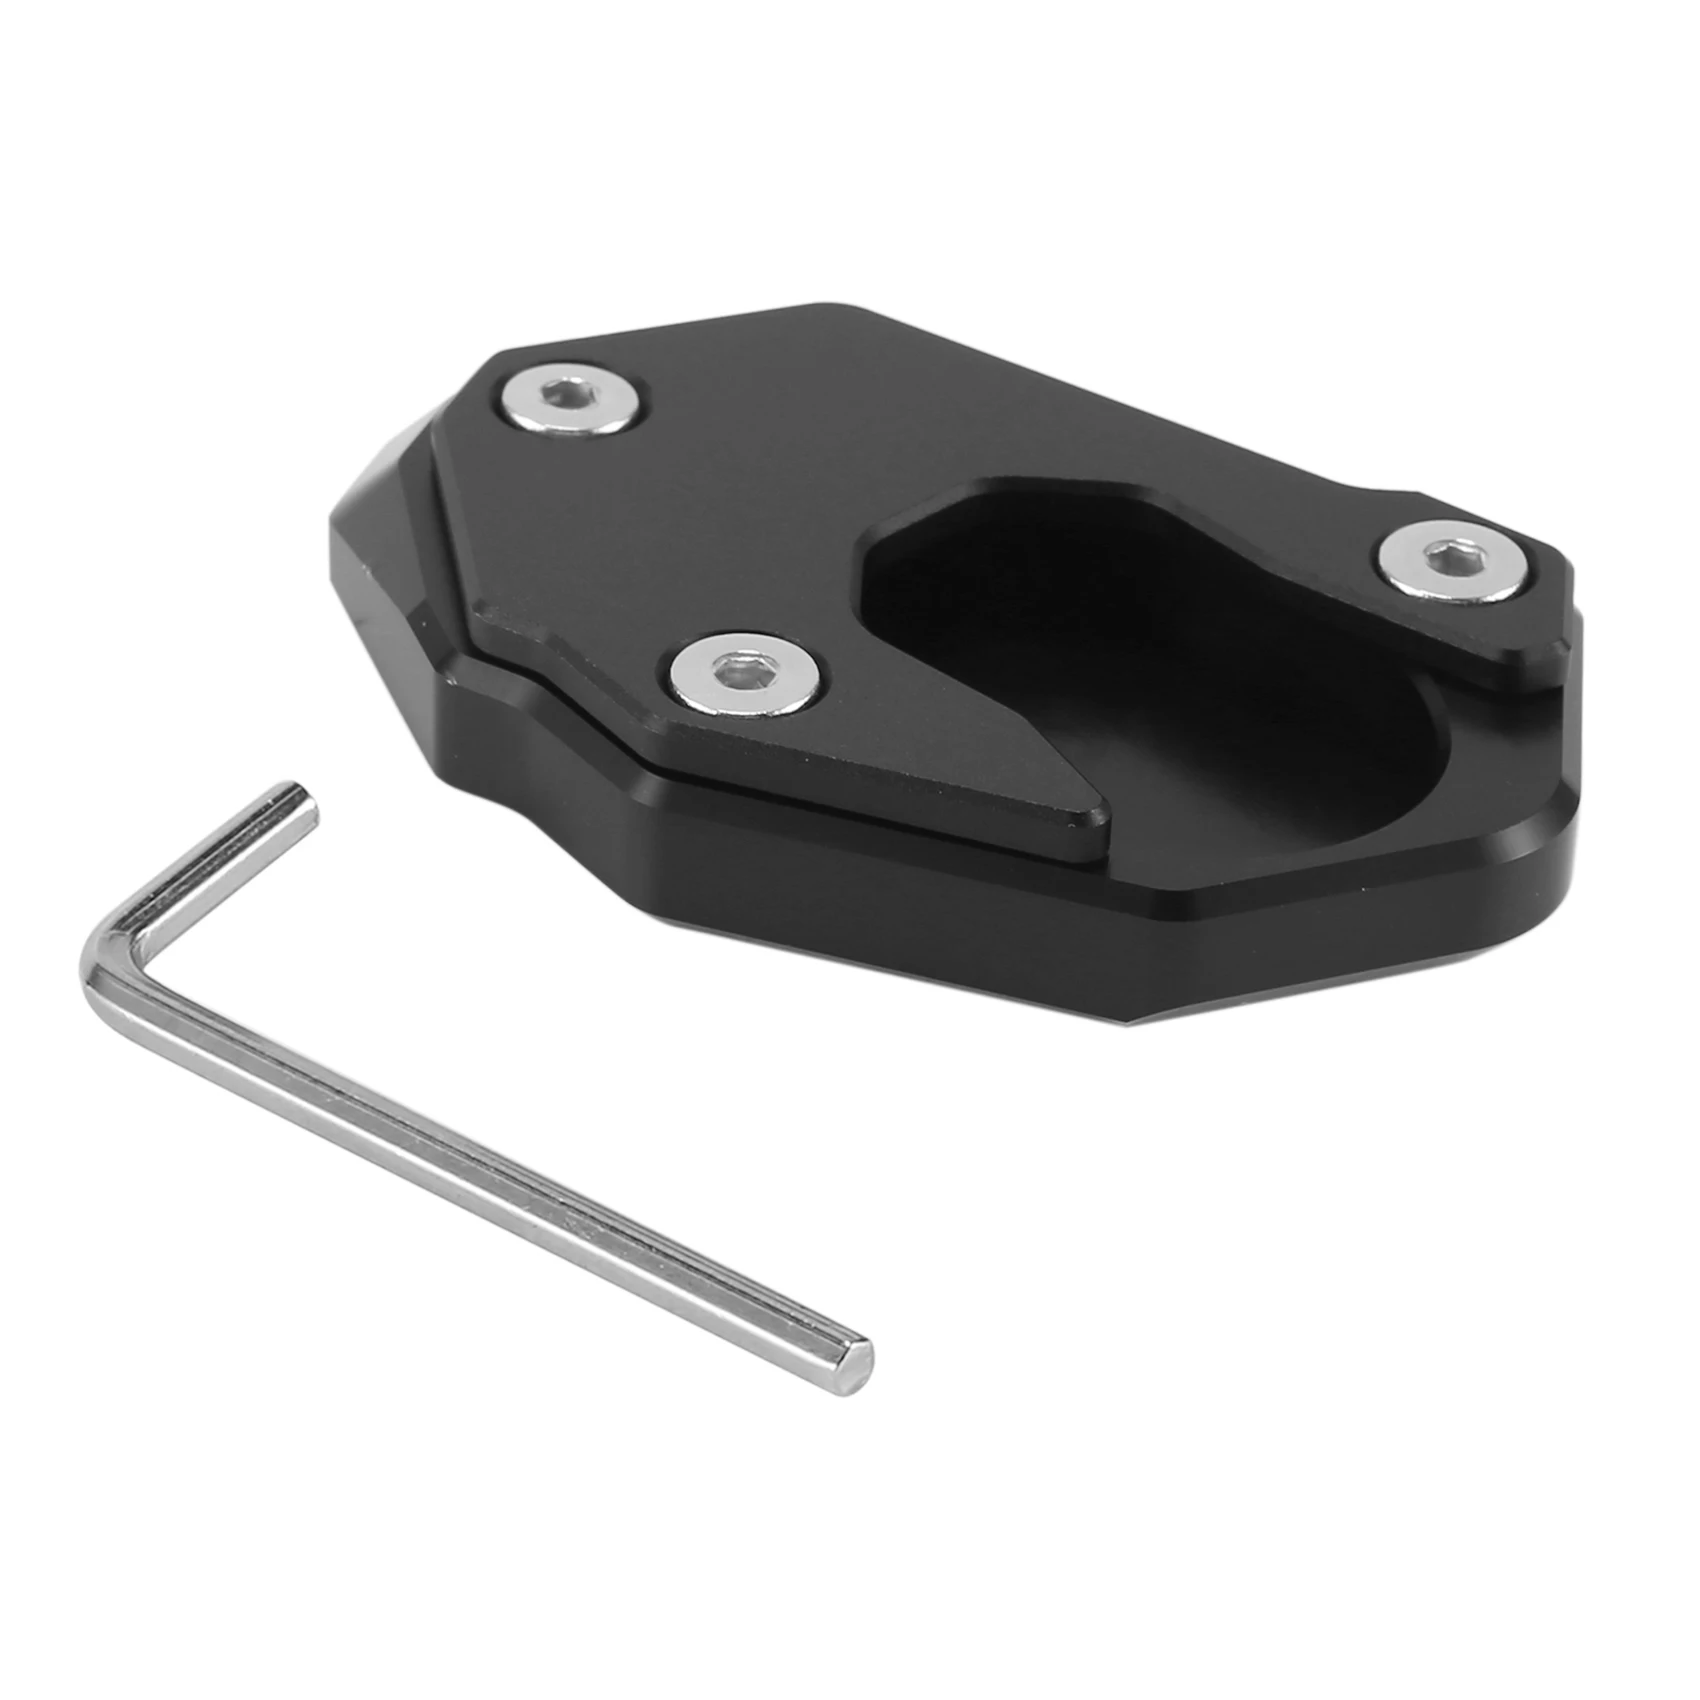 

Kickstand Plate Extension Pad Stand Enlarger for Kawasaki Z900 Z900RS SE 2022 Z1000 Z1000SX ER6N Z650 ZX6R(Black)